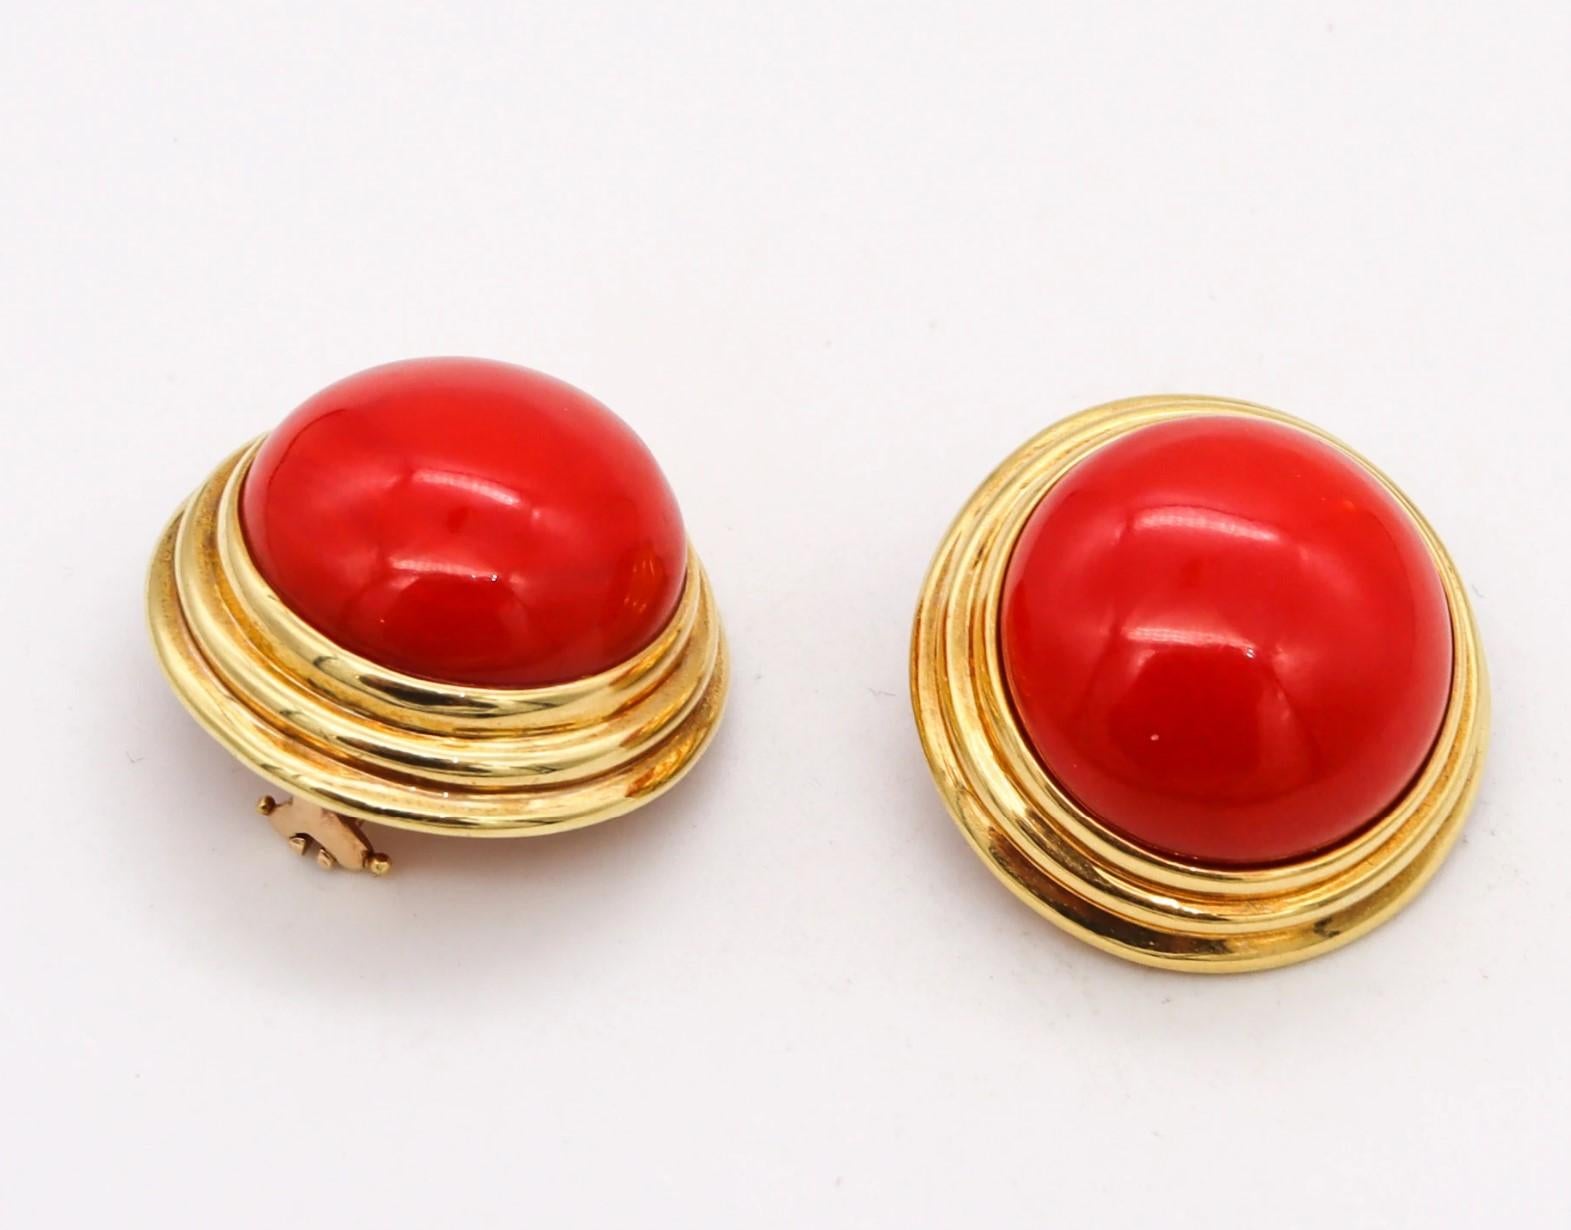 Cellino 1970 Italy Massive Earrings in 18Kt Gold 70.2 Ctw Sardinian Red Coral For Sale 1